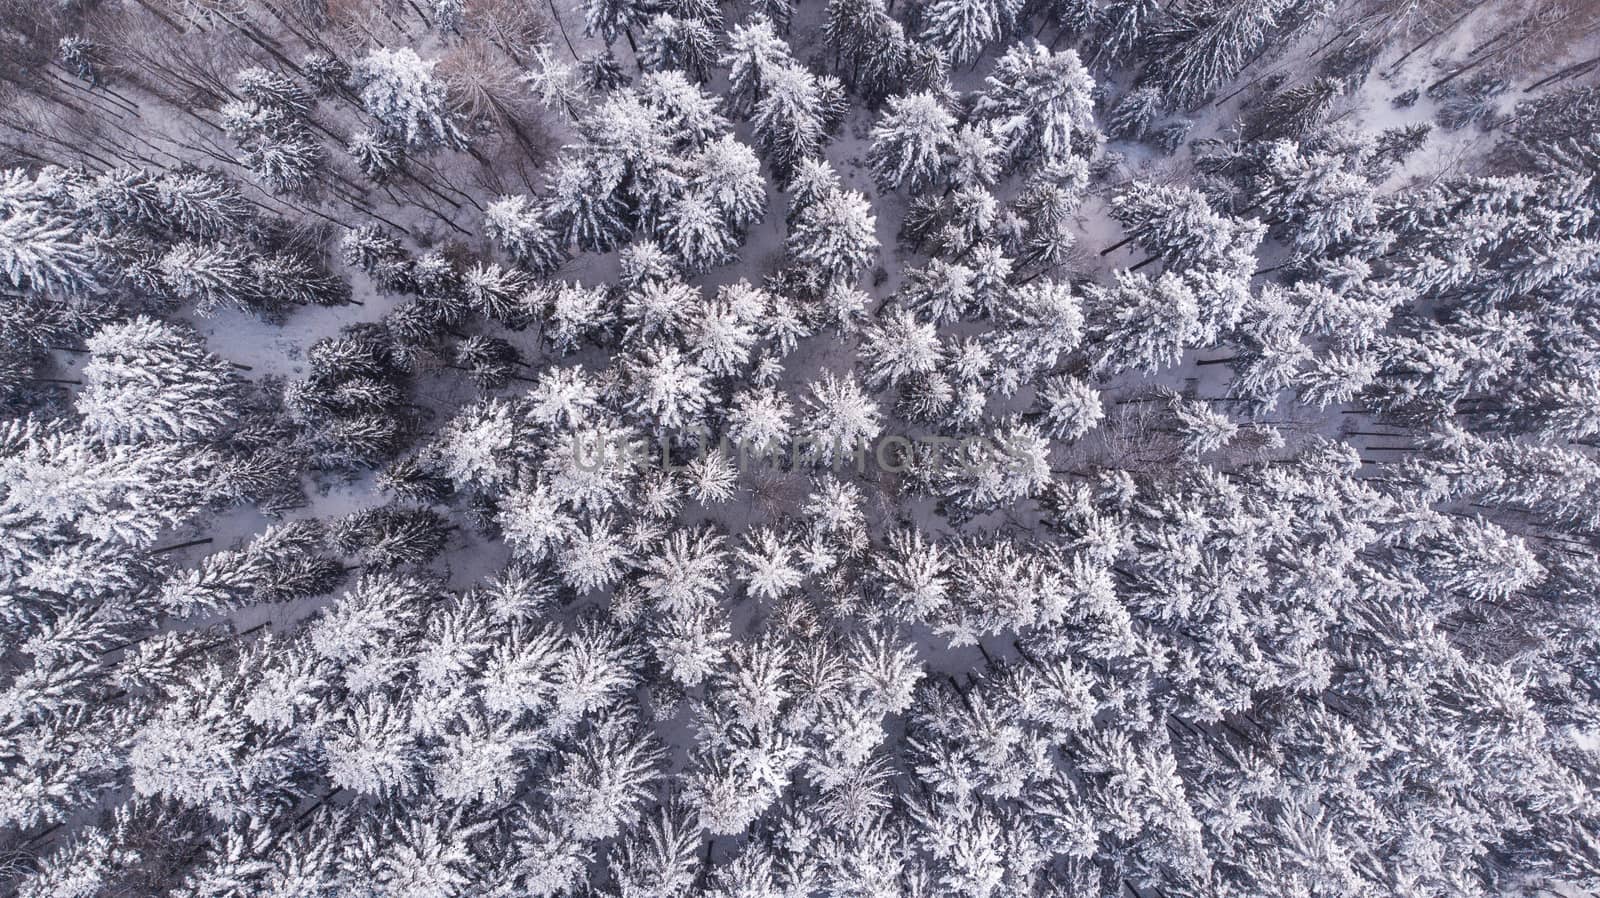 Snow Covered Pine Forest at Winter, Aerial Drone Top Down View by merc67